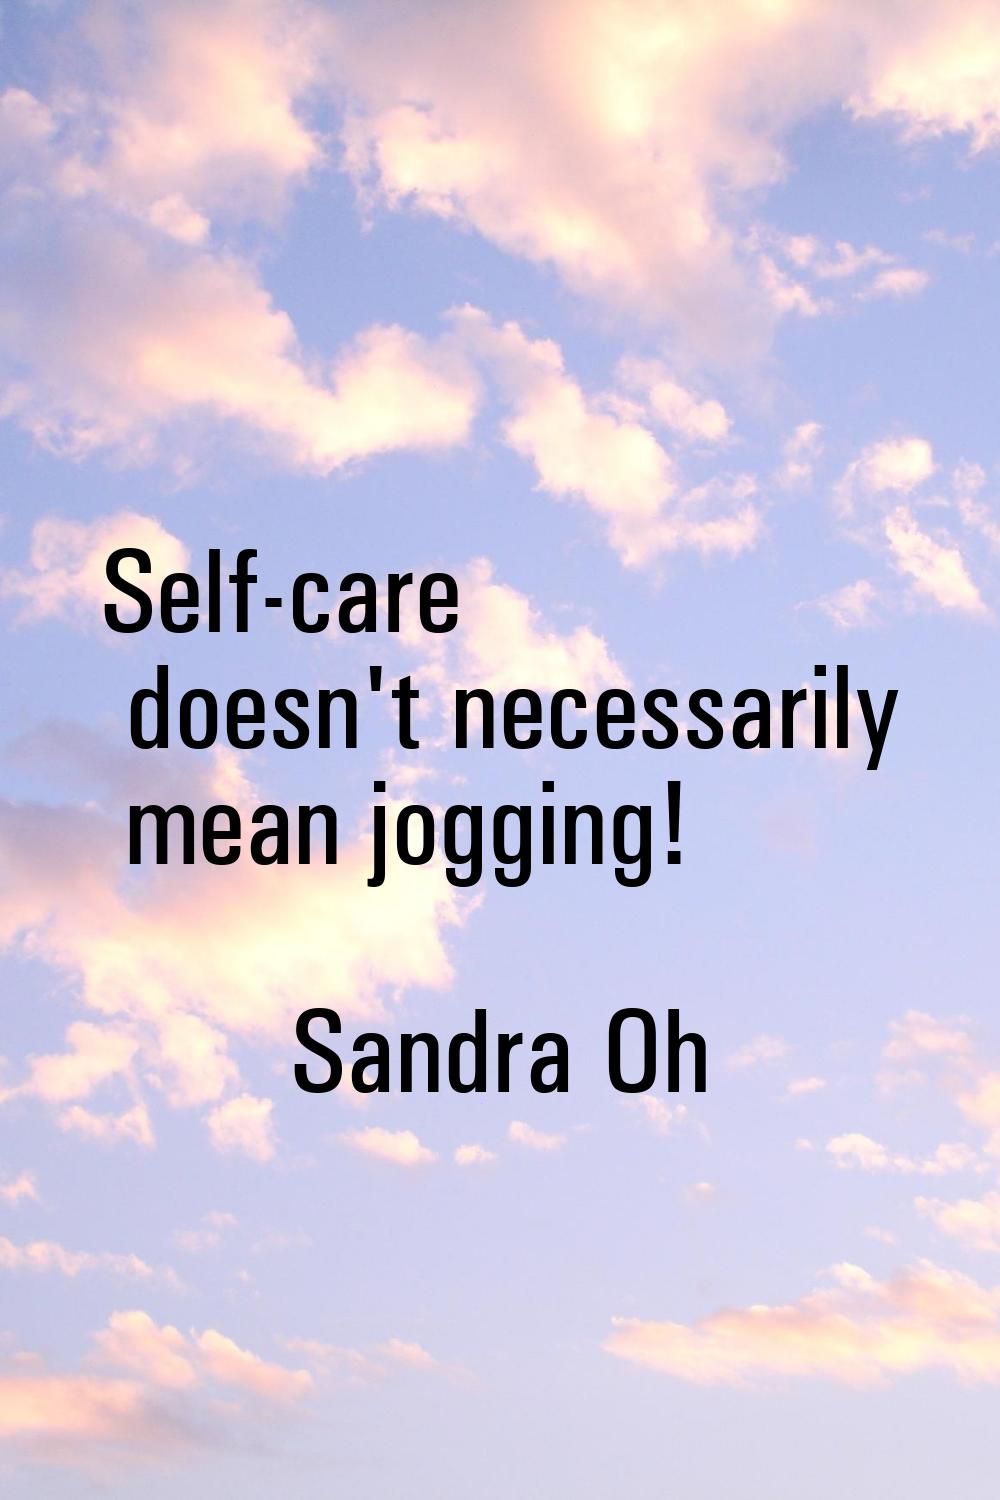 Self-care doesn't necessarily mean jogging!